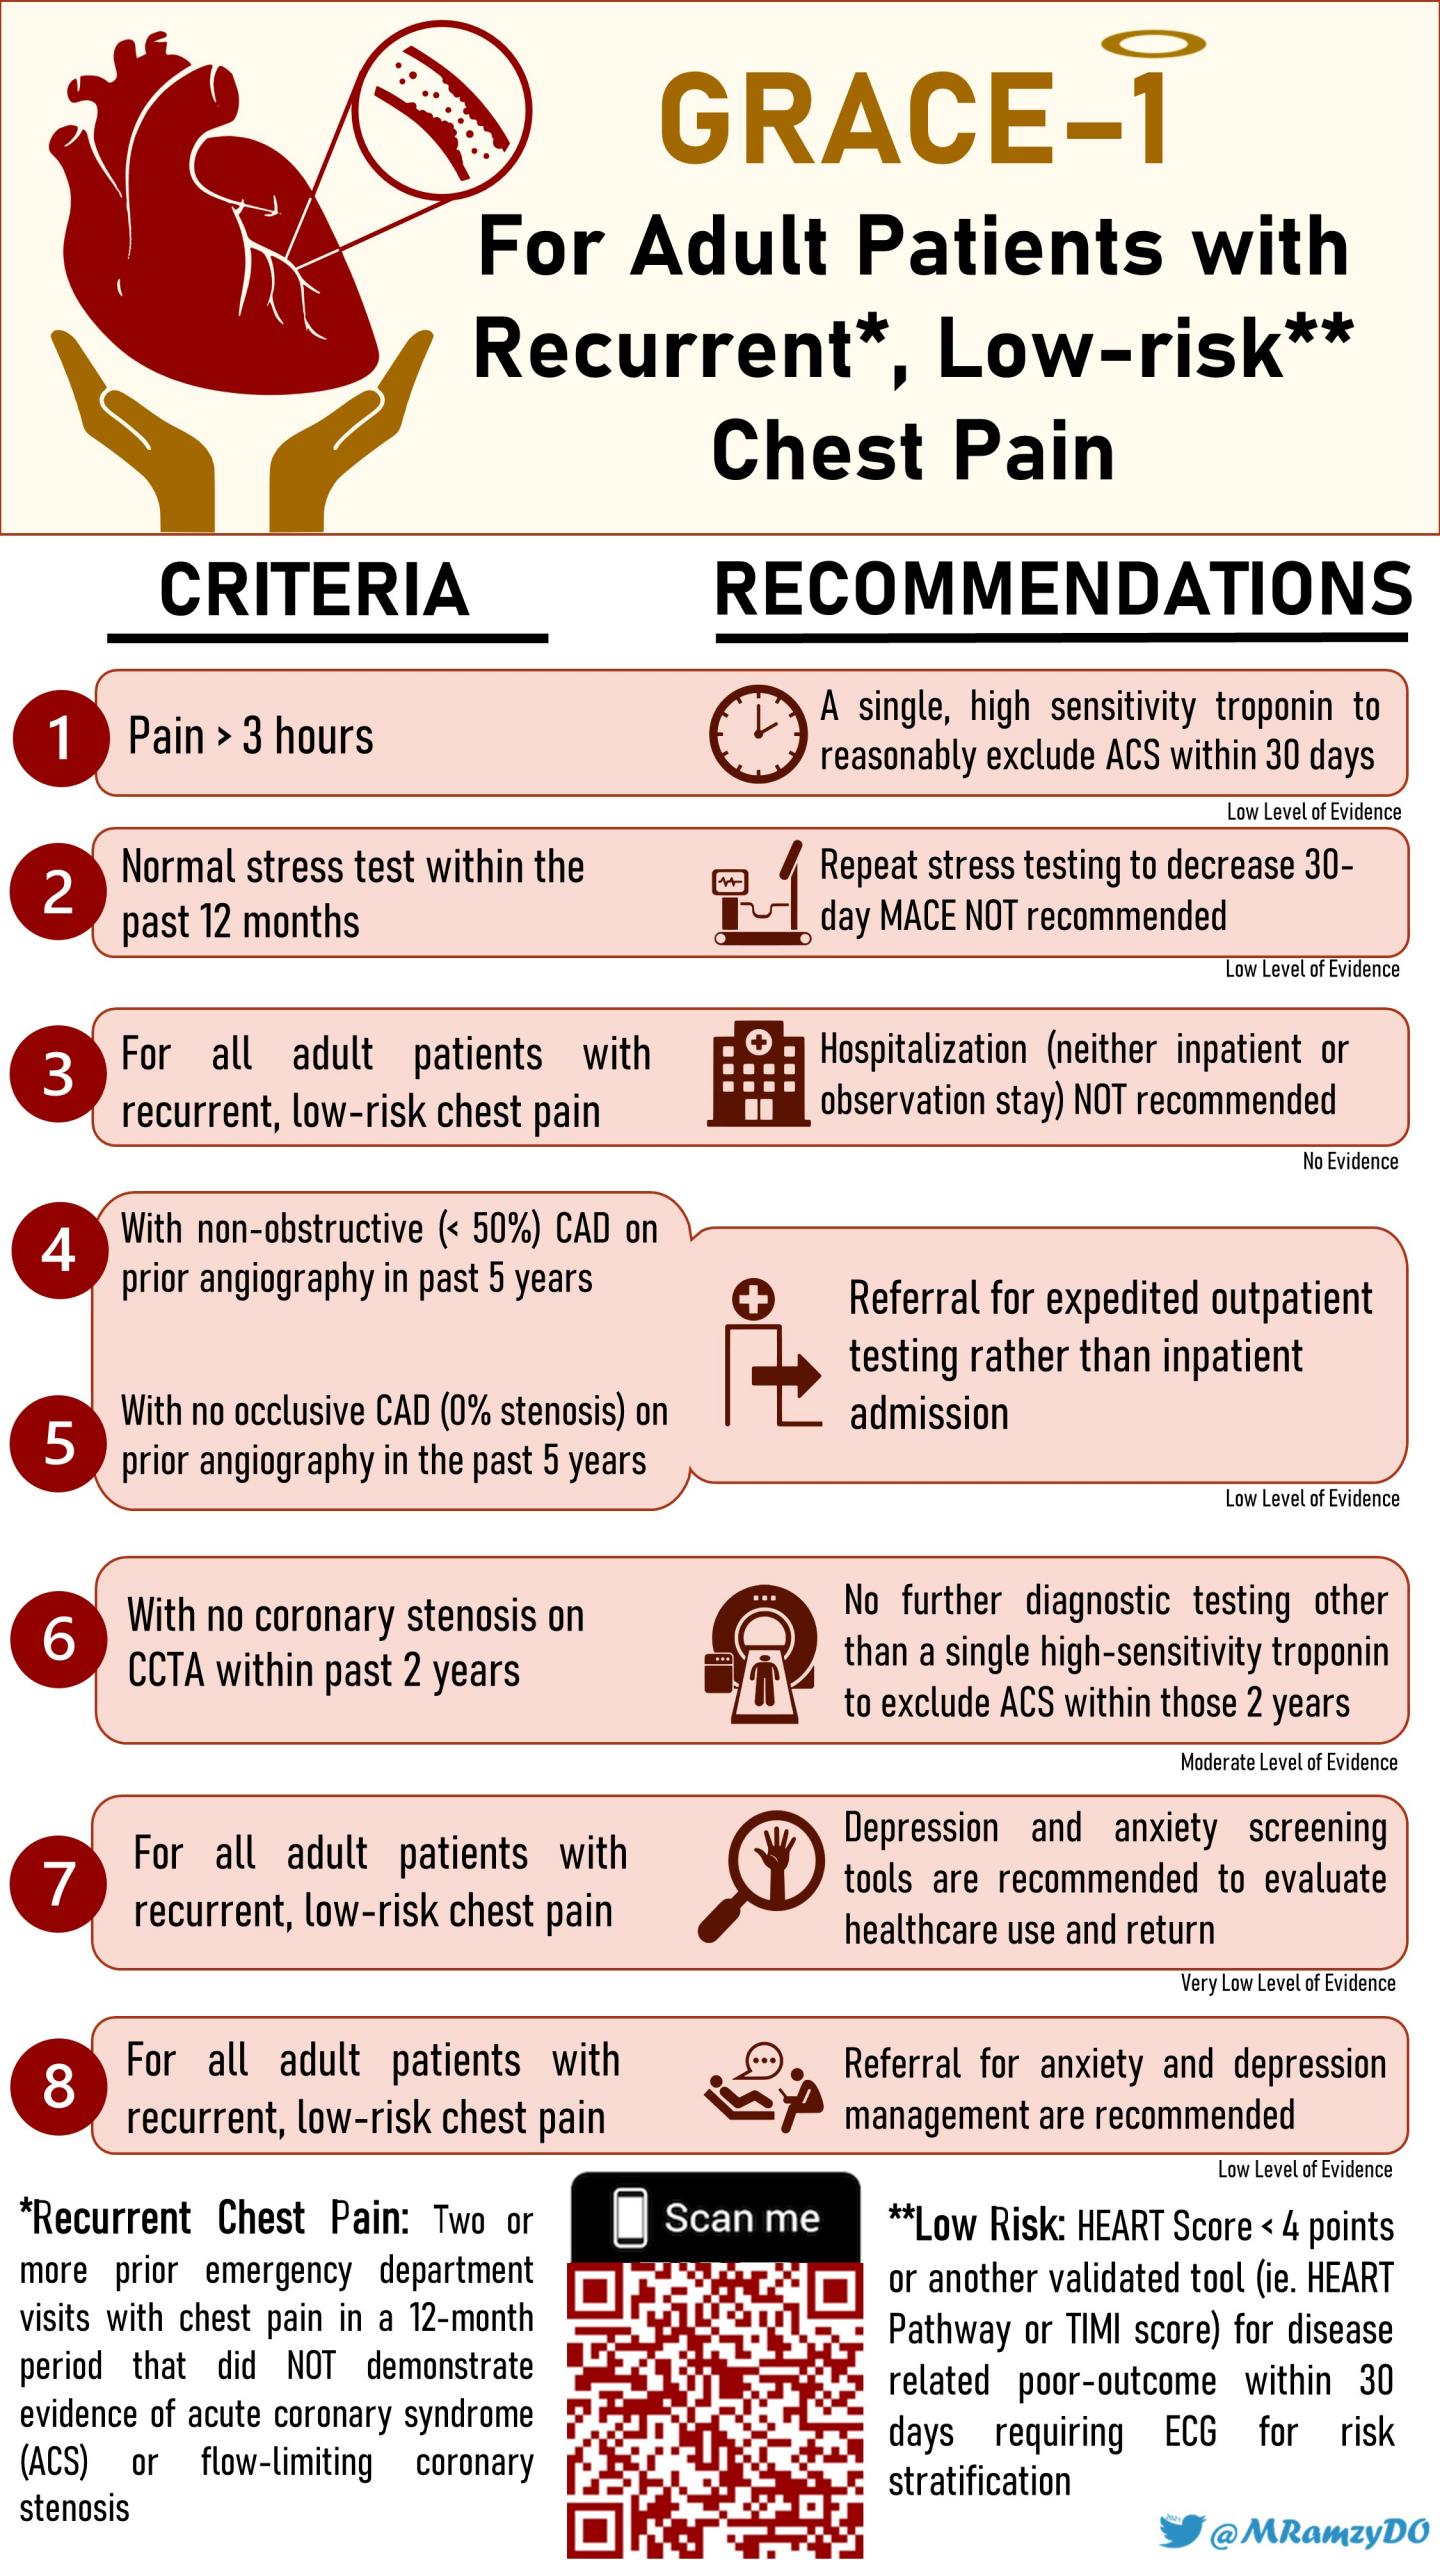 GRACE-1 for Adults With Recurrent, Low-risk Chest Pain